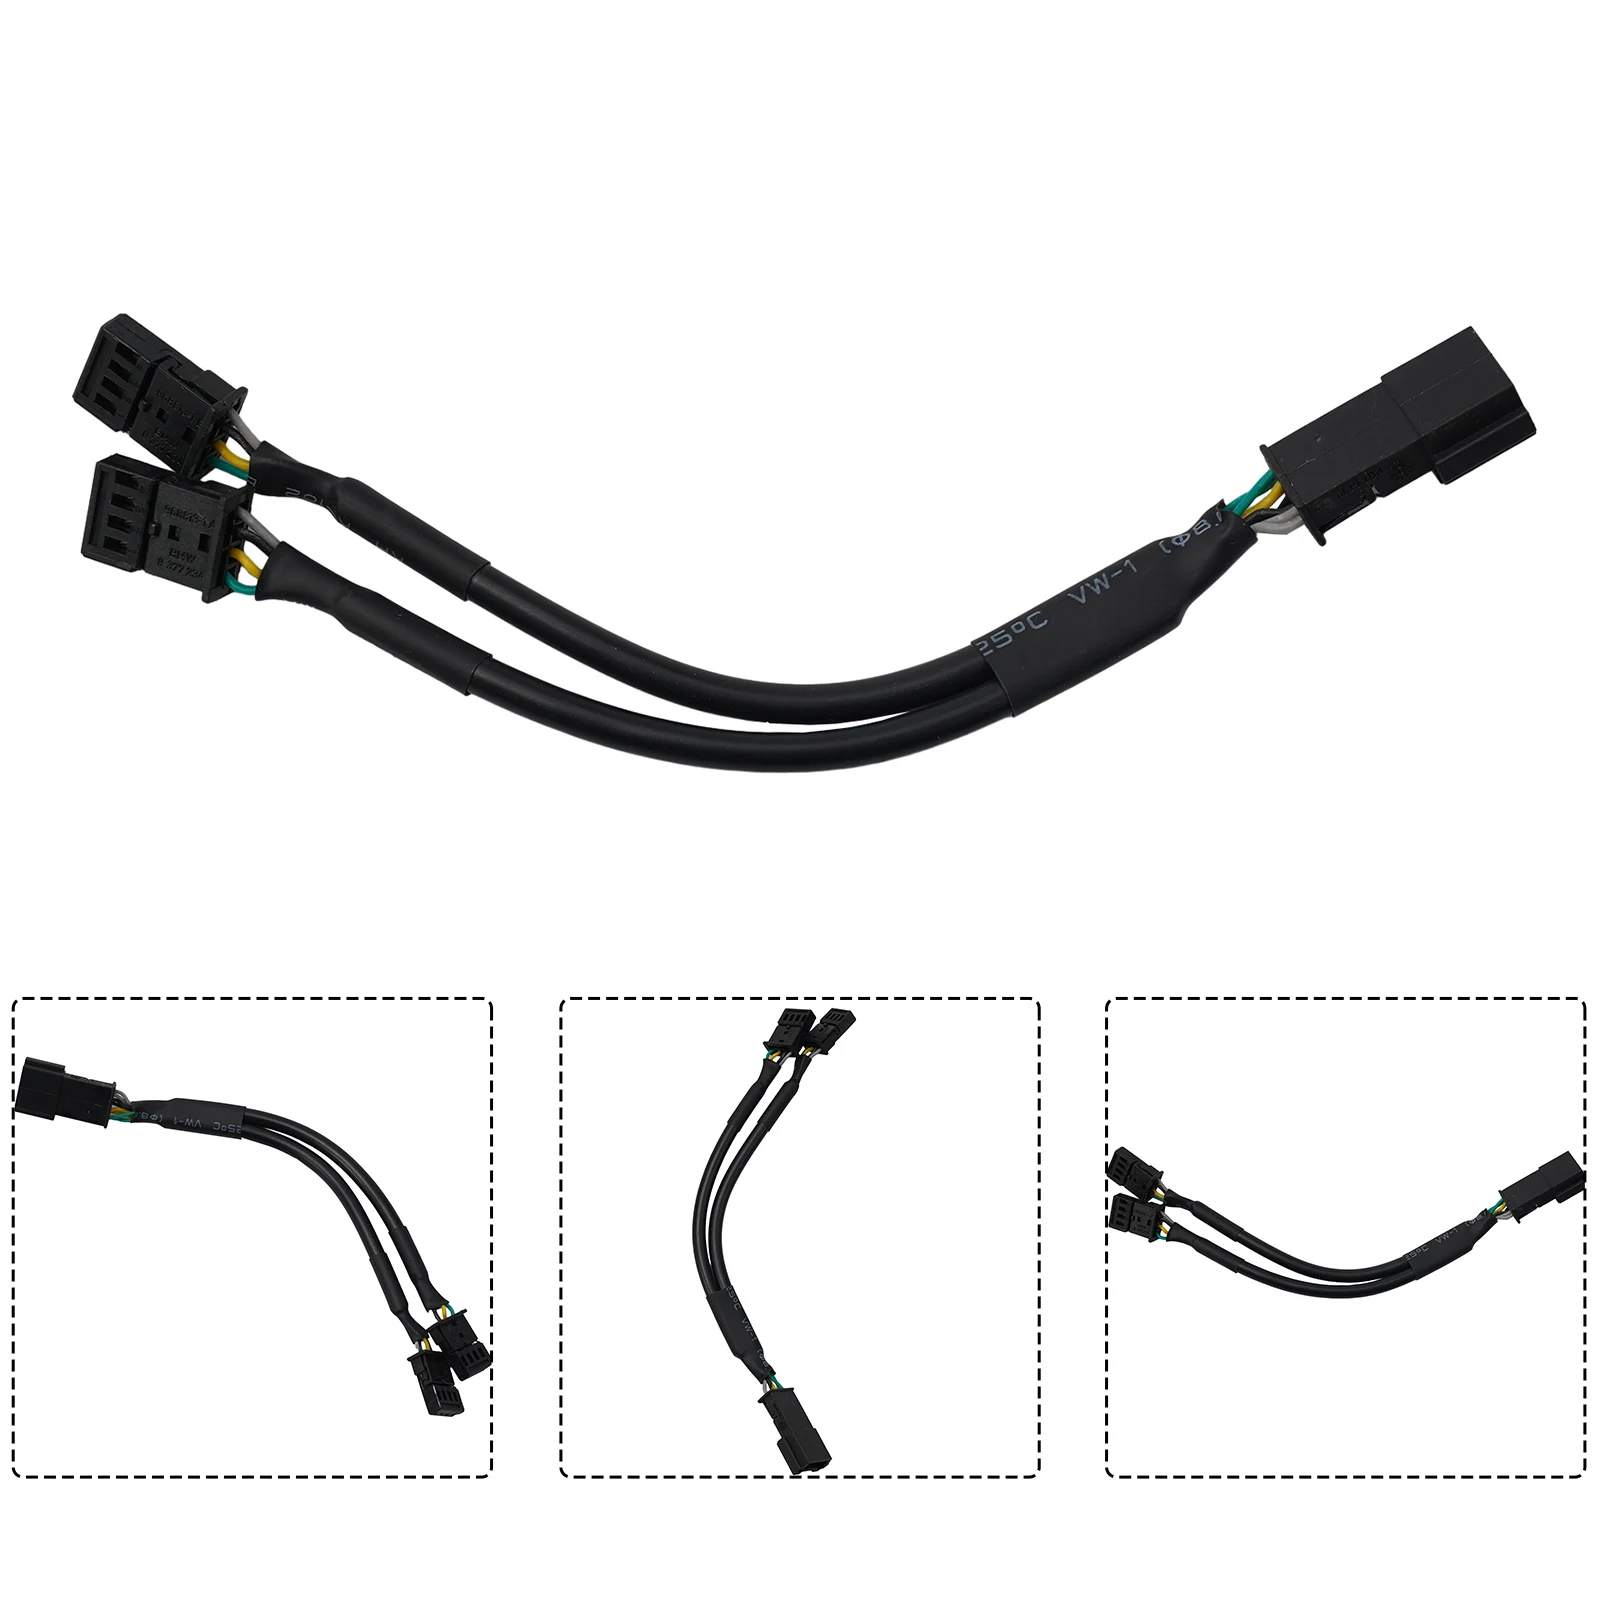 

Cable Adapter ECU Y Splitter 15cm Length Black Cable Adapter Cable Wire Controller For BMW F10 F10 F18 F20 F30